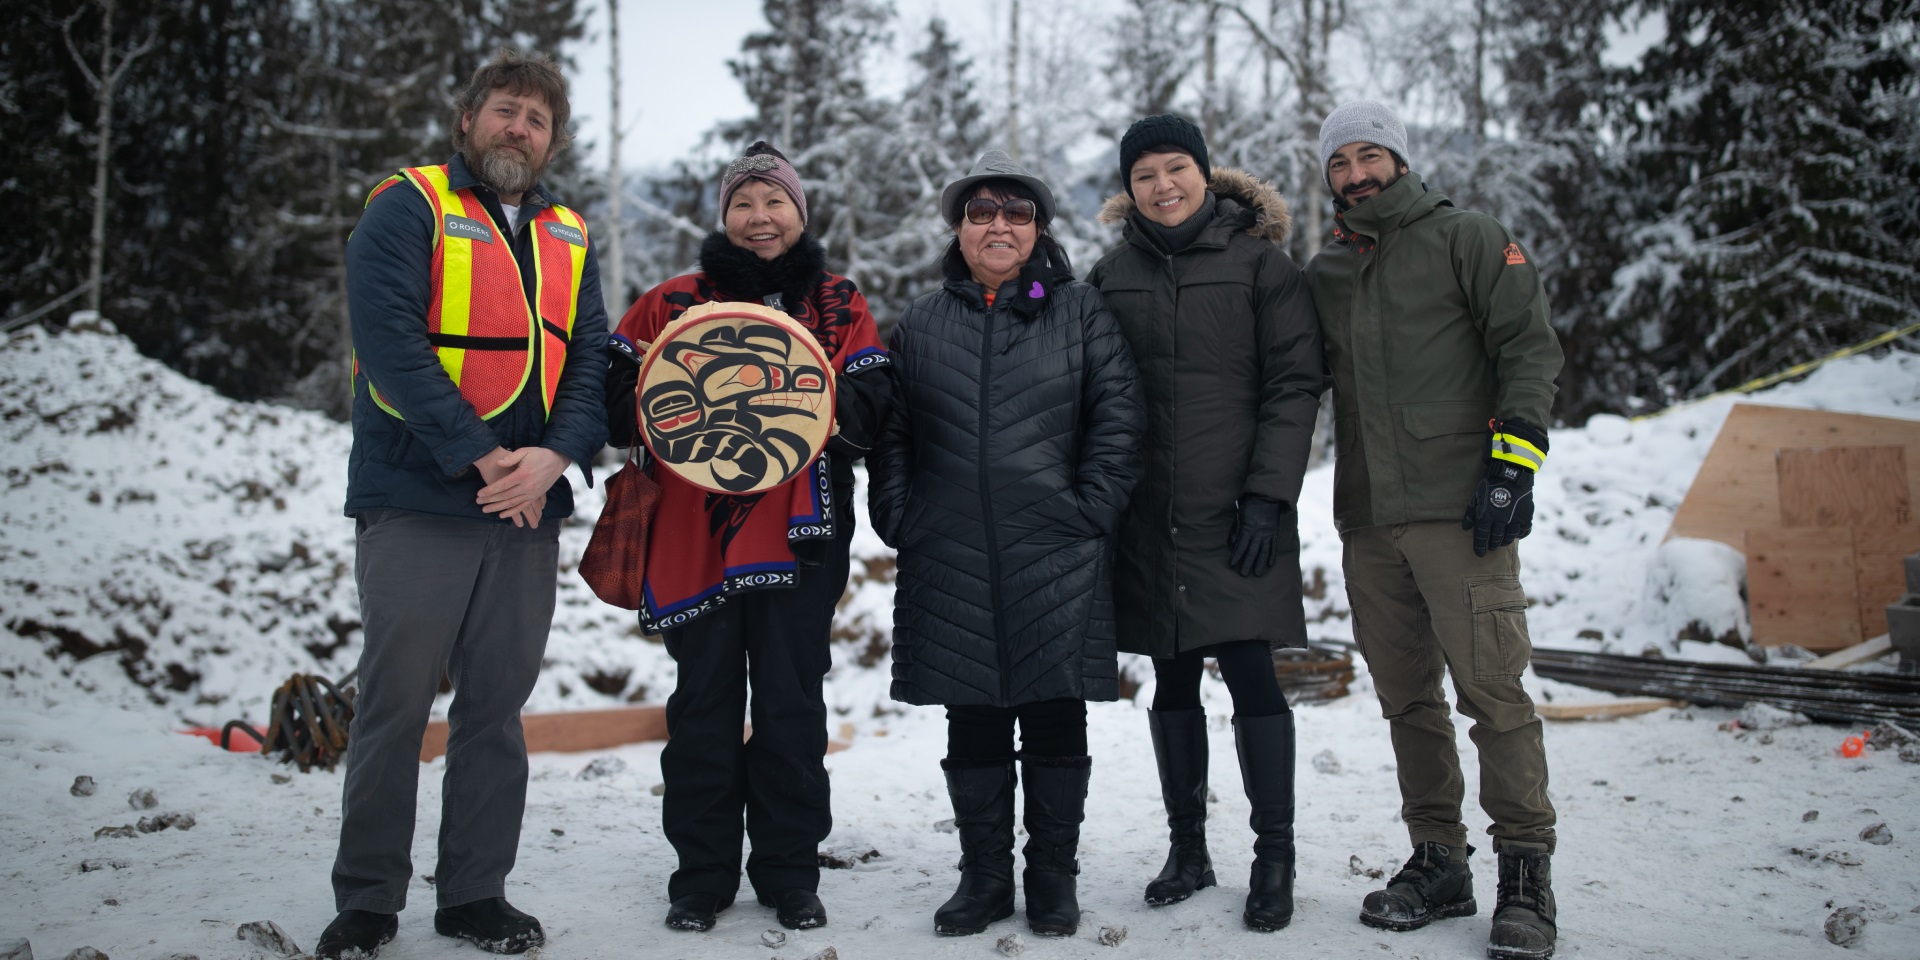 Group of people in snowy forest with one of them holding an Indigenous item